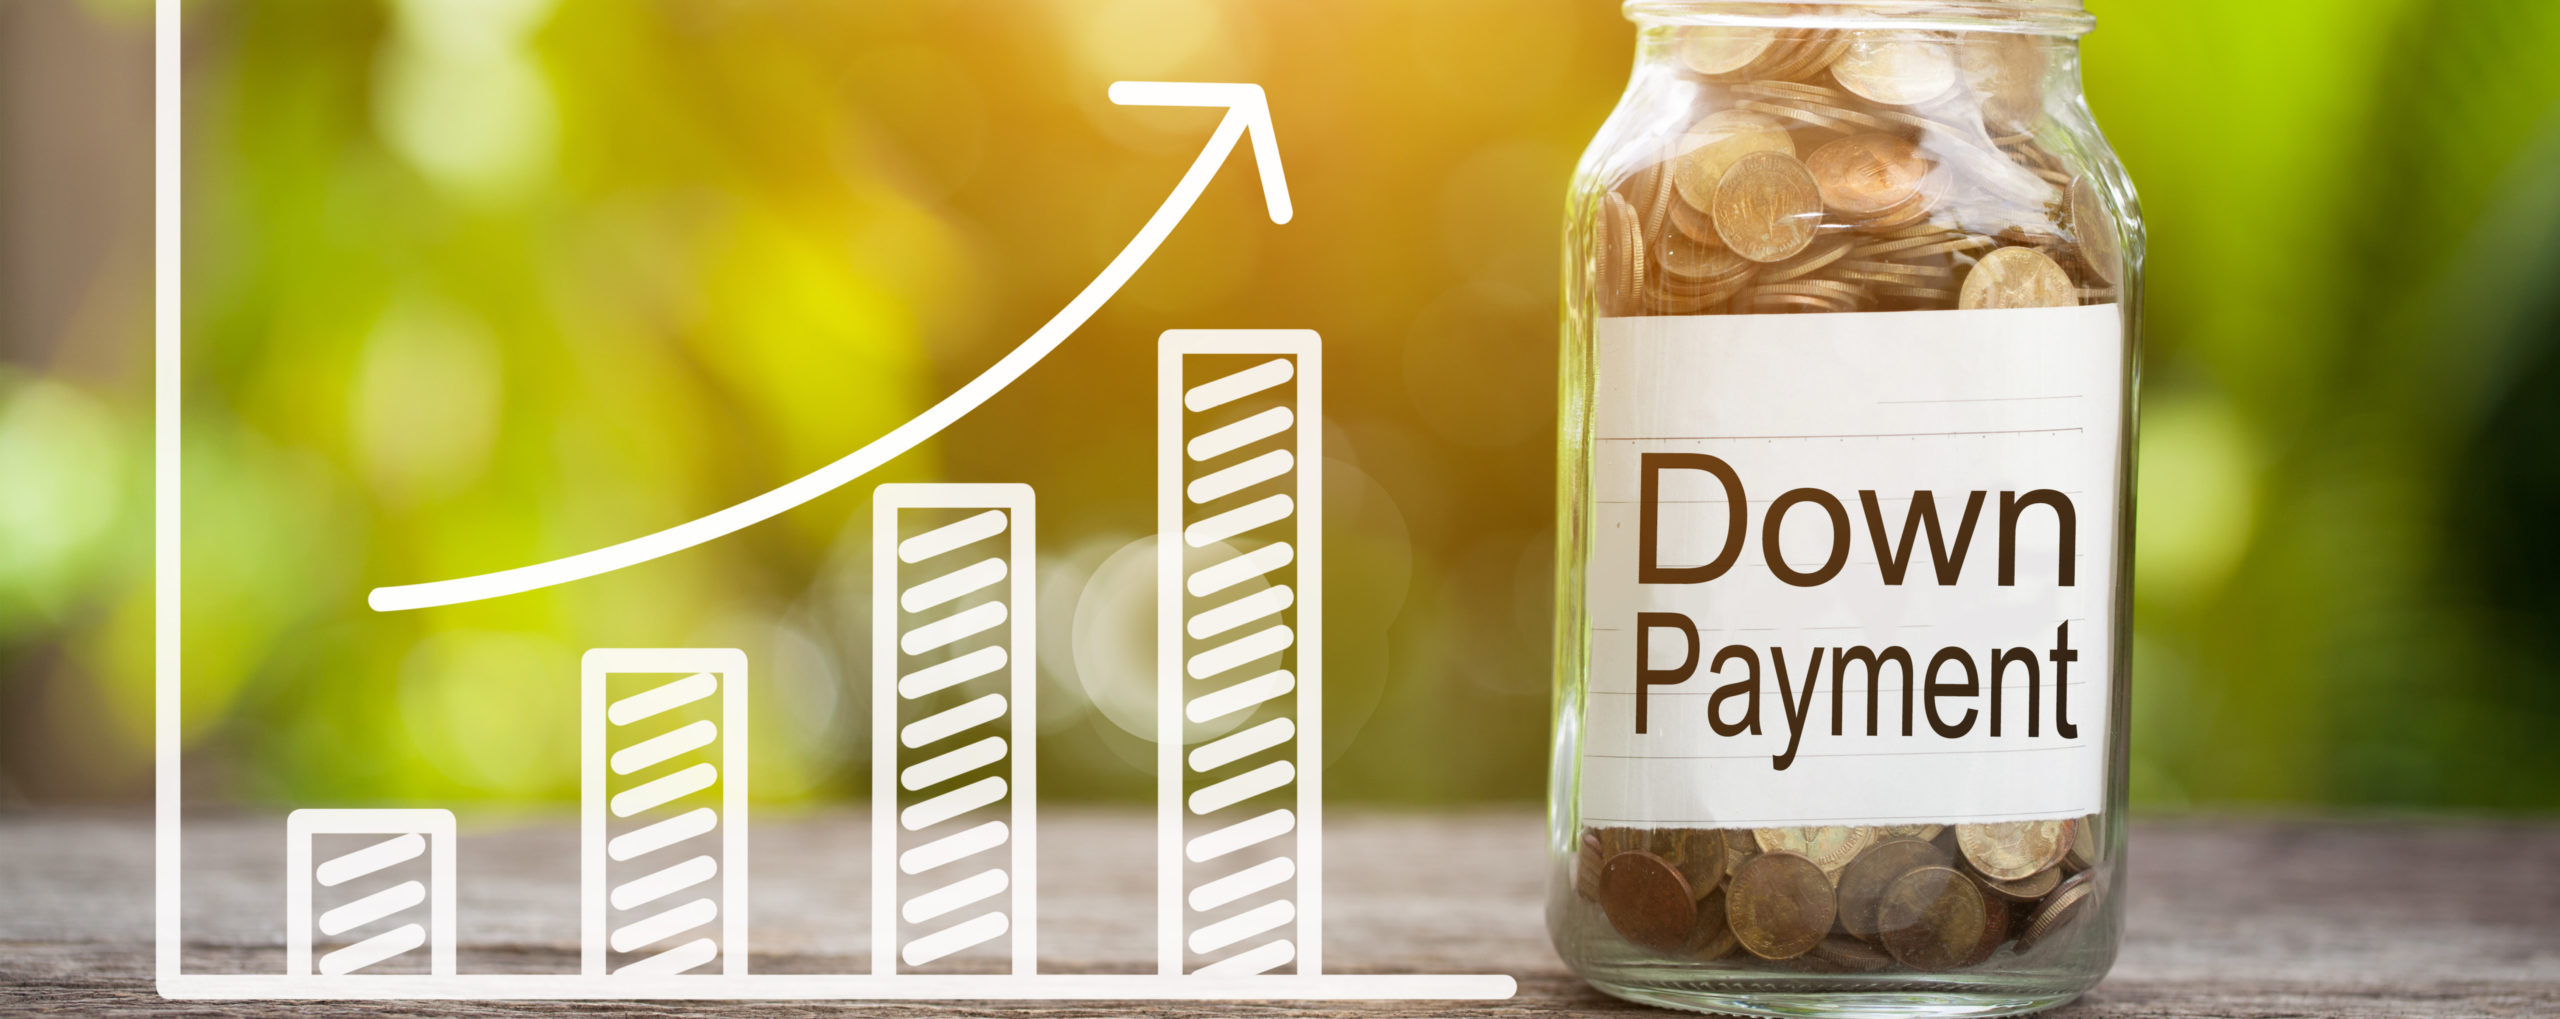 What’s a down payment, and how to save for it?